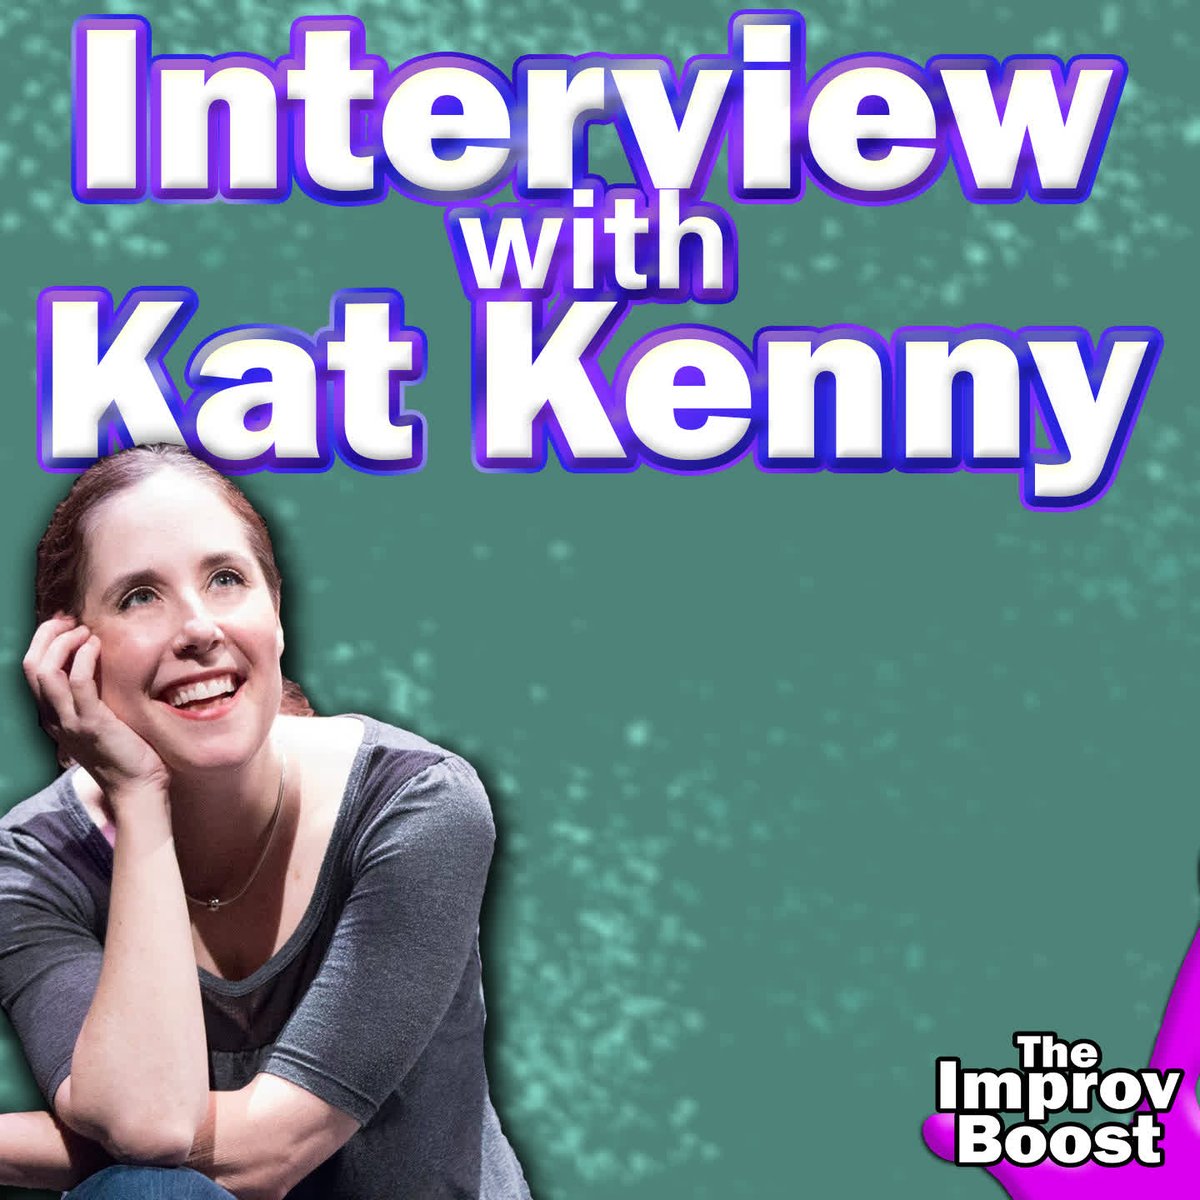 Next week we will be interviewing KAT KENNY

Kat is a remrkable improv performer and teacher - with so much passion and insight.  It was fantastic recording with her, and we look forward to sharing it.

#KatKenny #Improv